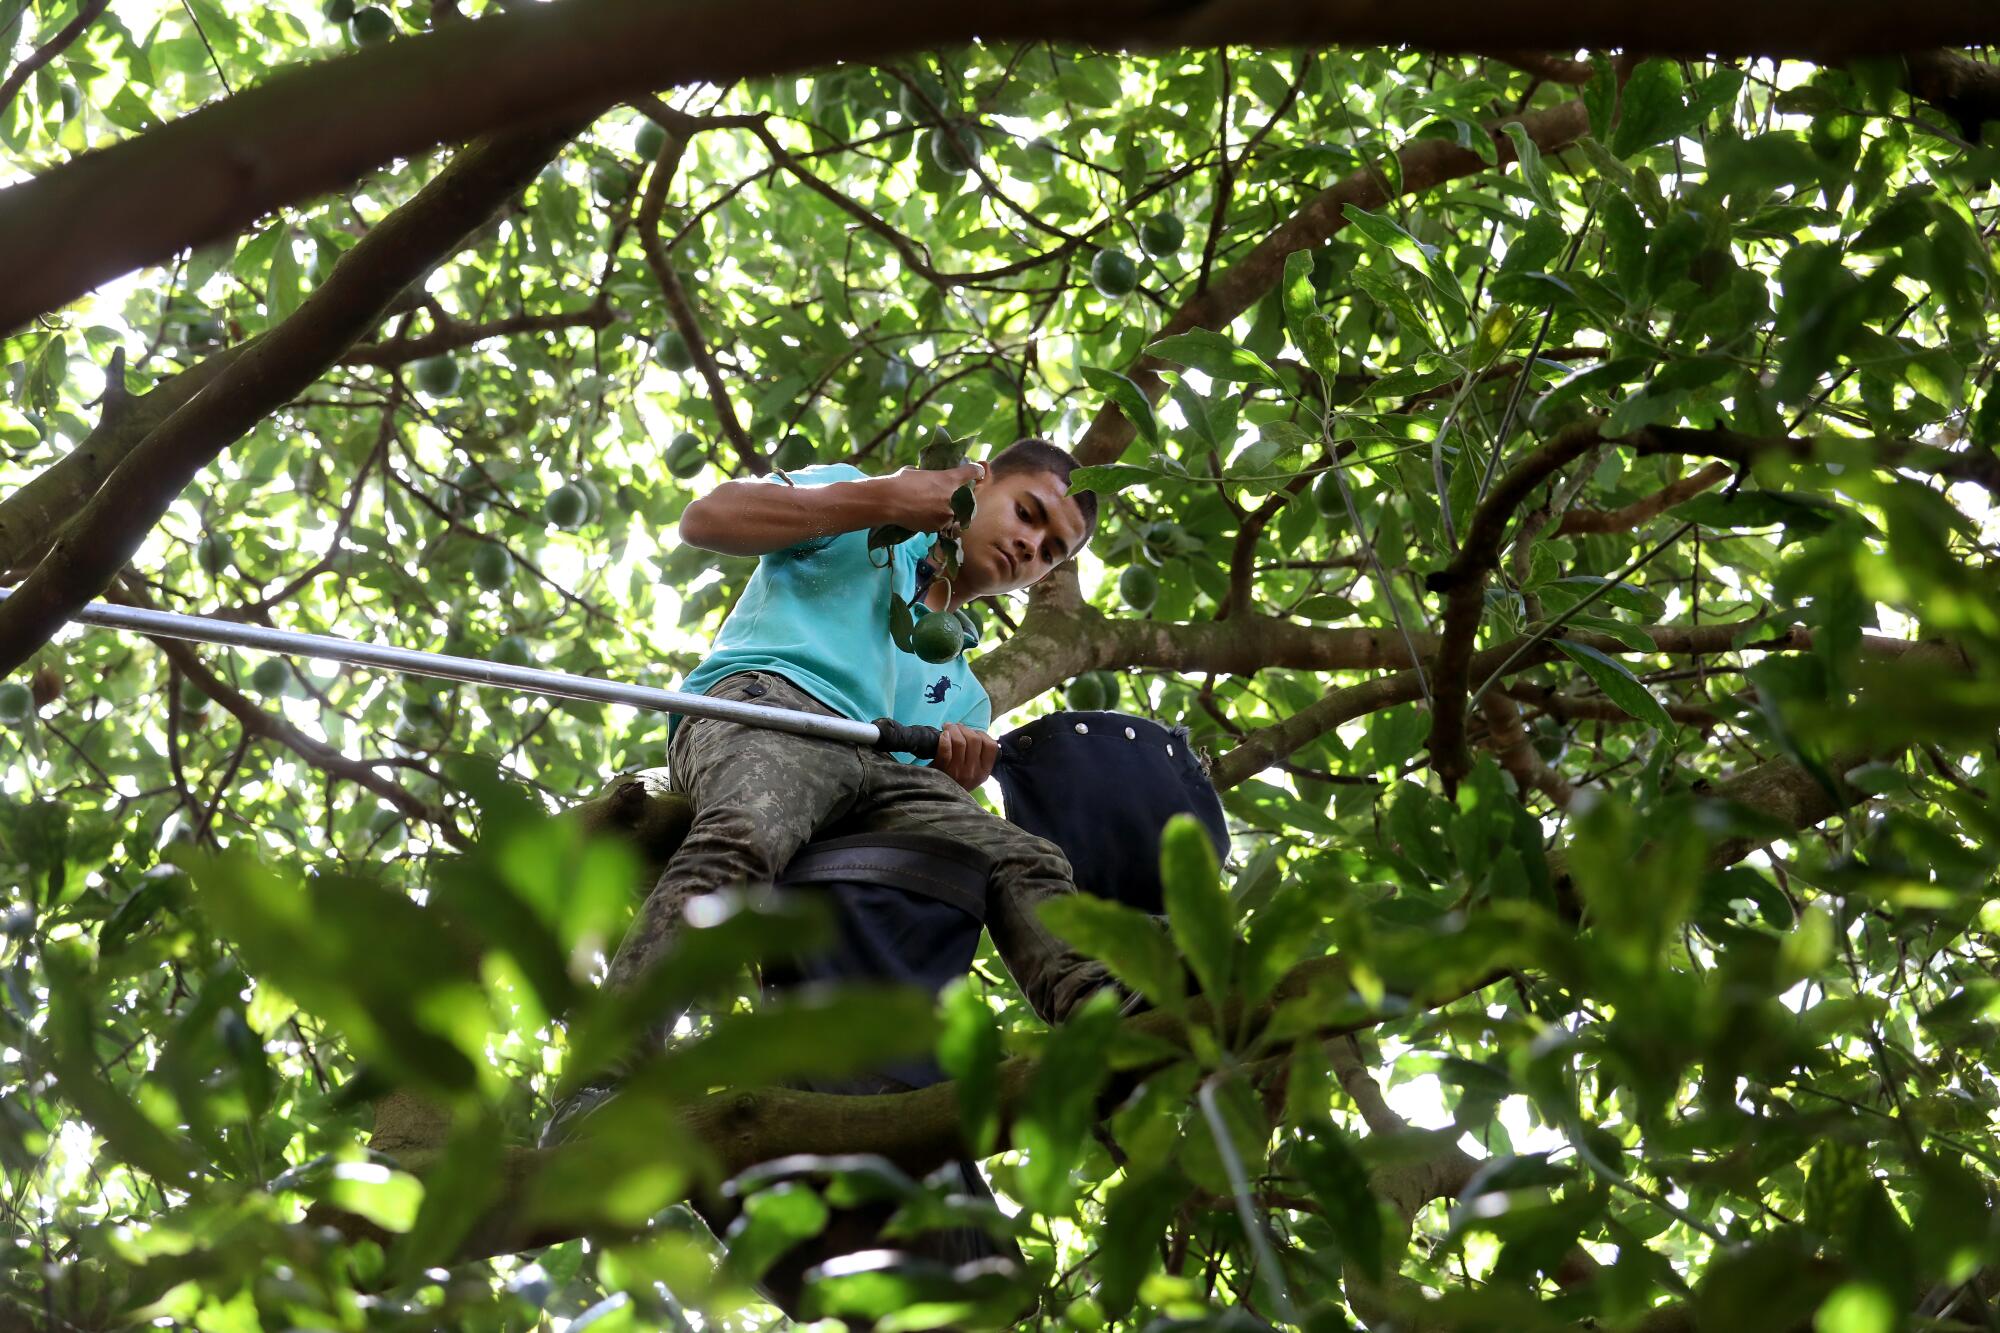 Avocado picking is well-paid by Mexican standards, but it is an increasingly dangerous job.